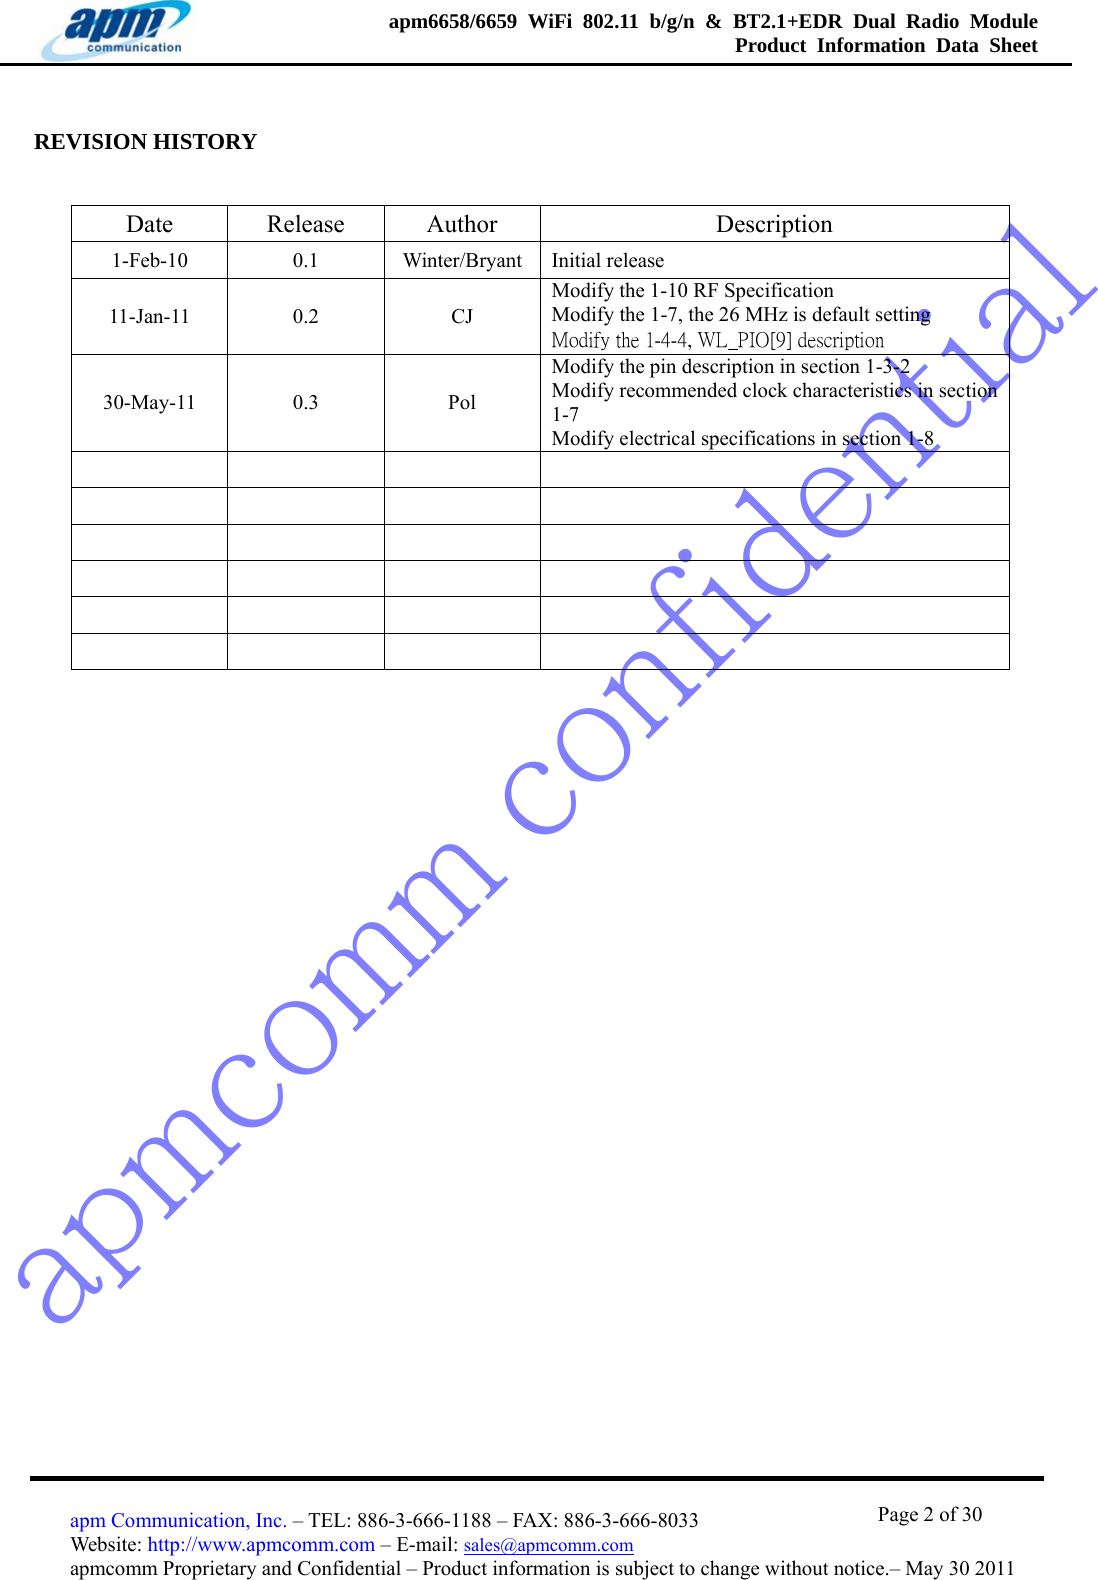 apmcomm confidentialapm6658/6659 WiFi 802.11 b/g/n &amp; BT2.1+EDR Dual Radio Module  Product Information Data Sheet                                       Page 2 of 30 apm Communication, Inc. – TEL: 886-3-666-1188 – FAX: 886-3-666-8033 Website: http://www.apmcomm.com – E-mail: sales@apmcomm.com  apmcomm Proprietary and Confidential – Product information is subject to change without notice.– May 30 2011 REVISION HISTORY Date Release Author  Description 1-Feb-10 0.1 Winter/Bryant Initial release 11-Jan-11 0.2  CJ Modify the 1-10 RF Specification Modify the 1-7, the 26 MHz is default setting Modify the 1-4-4, WL_PIO[9] description 30-May-11 0.3  Pol Modify the pin description in section 1-3-2 Modify recommended clock characteristics in section 1-7 Modify electrical specifications in section 1-8                         